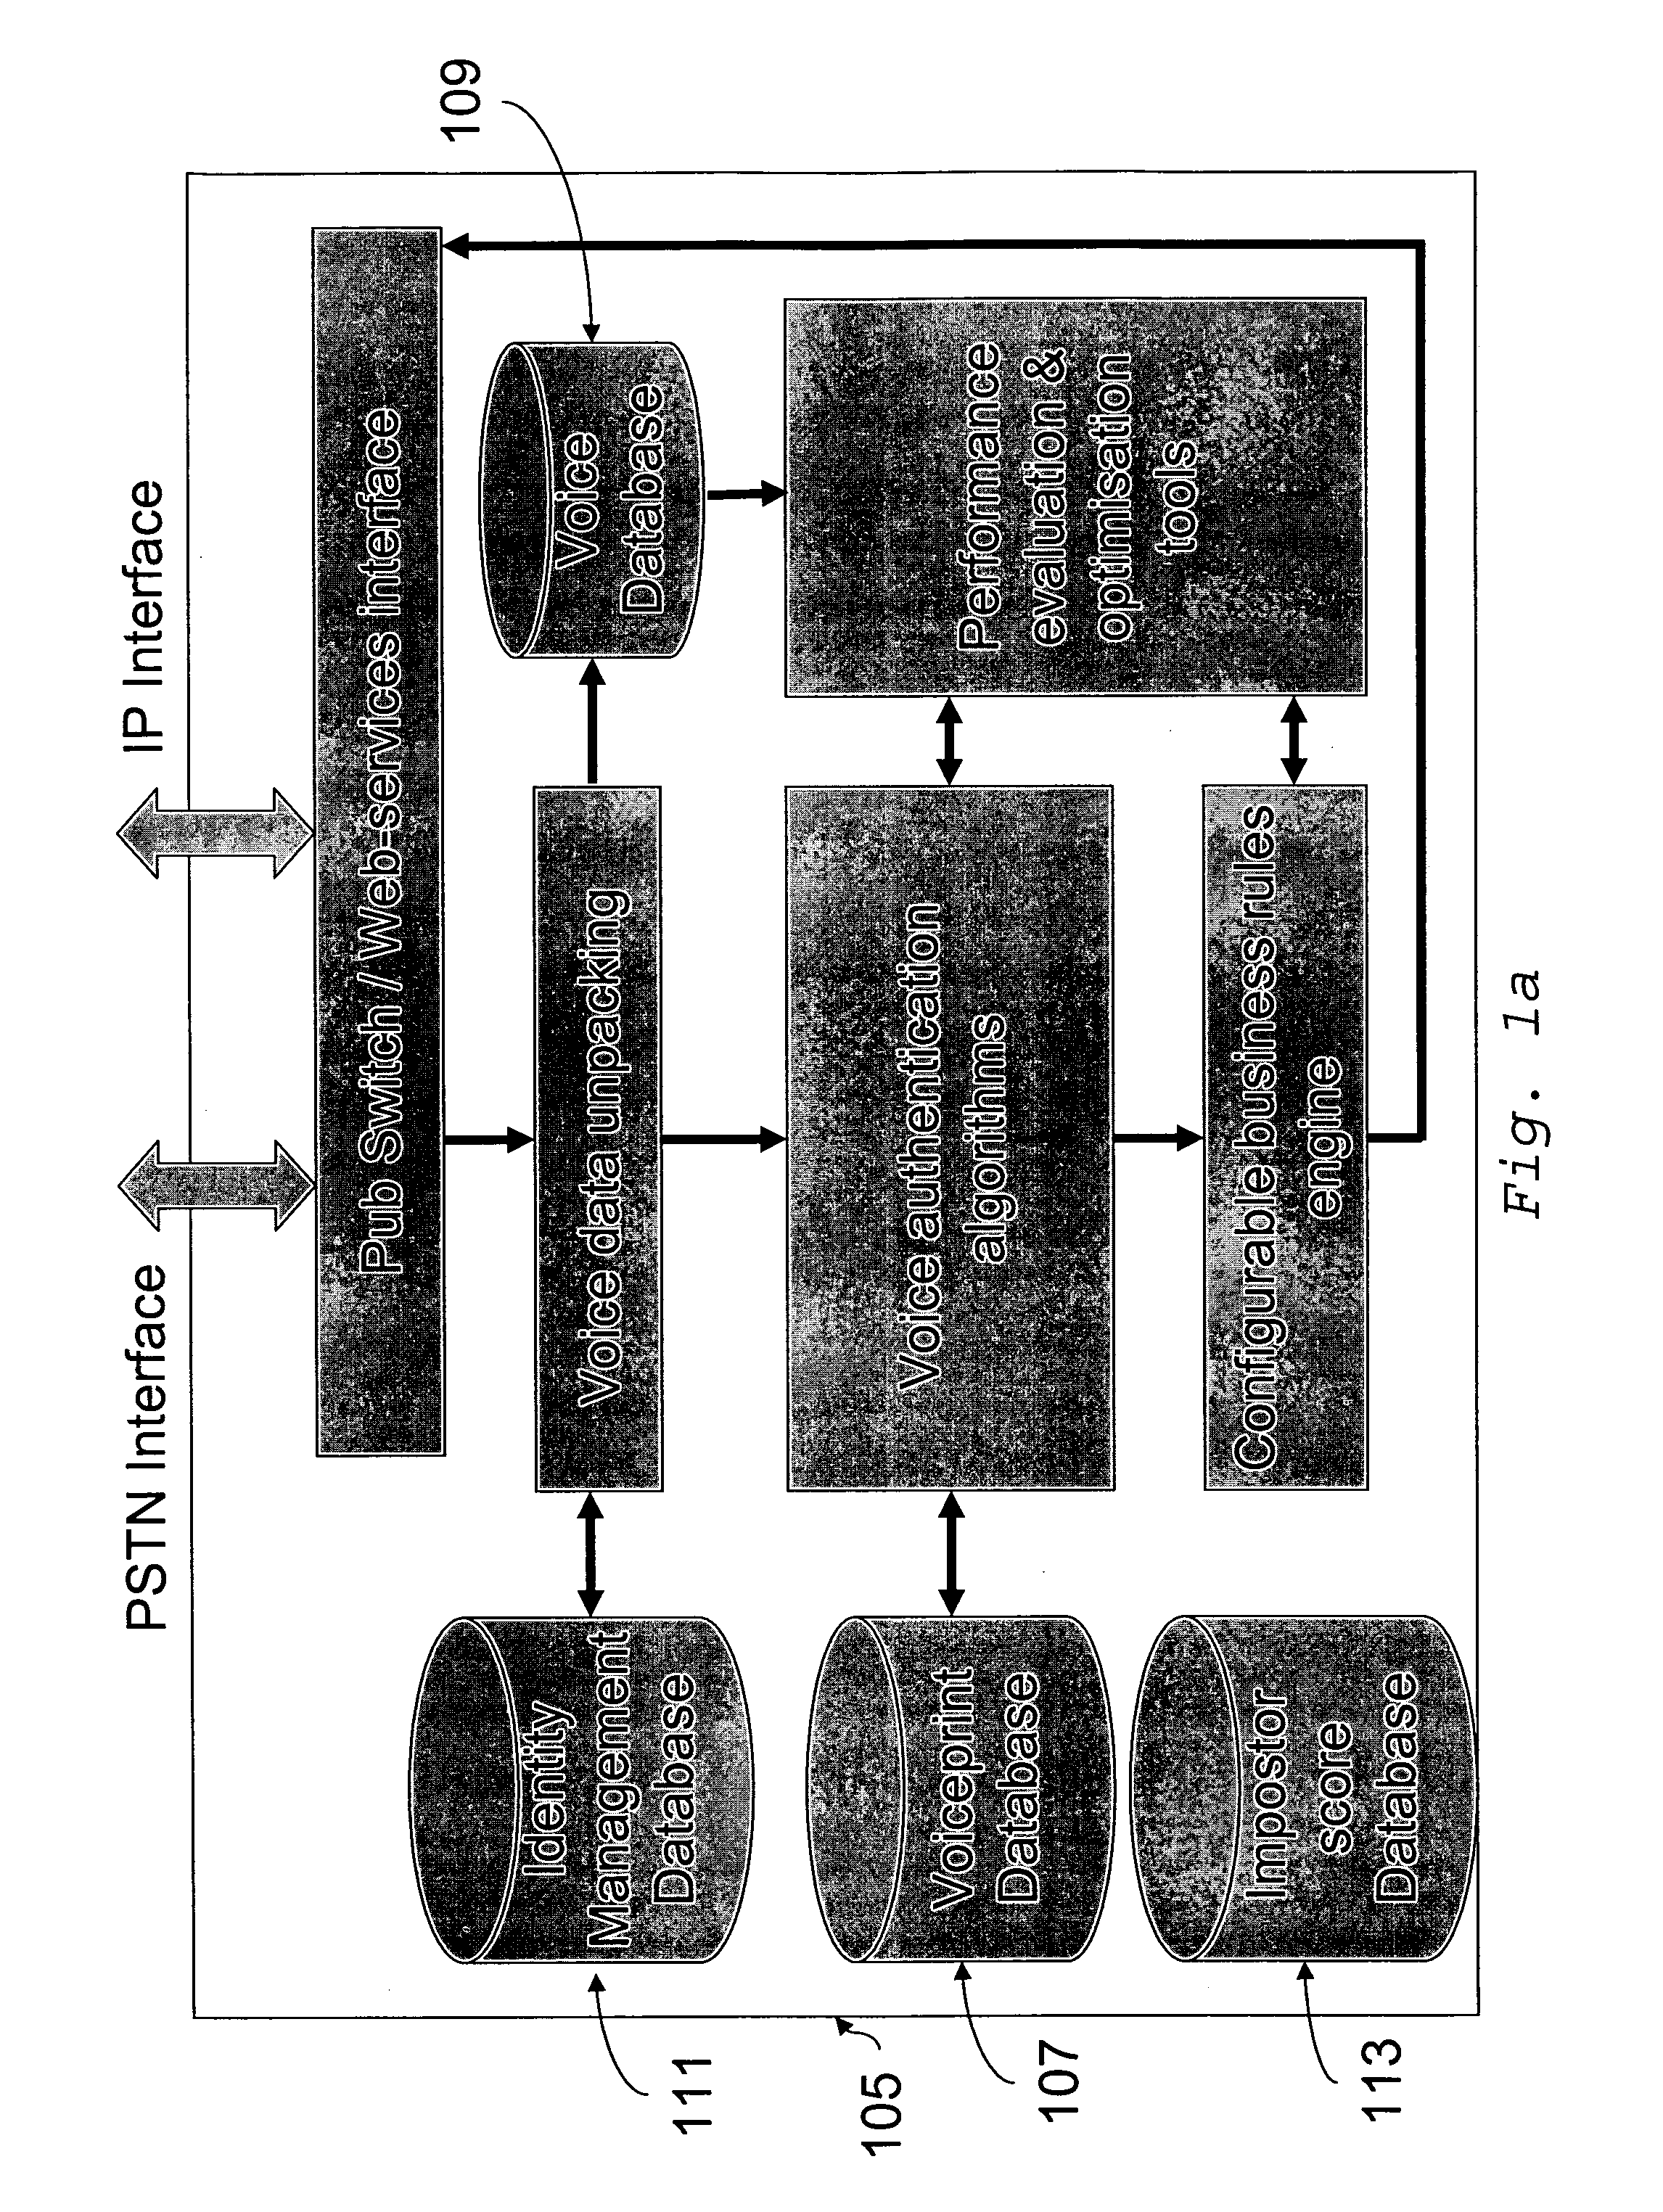 Voice authentication systems and methods